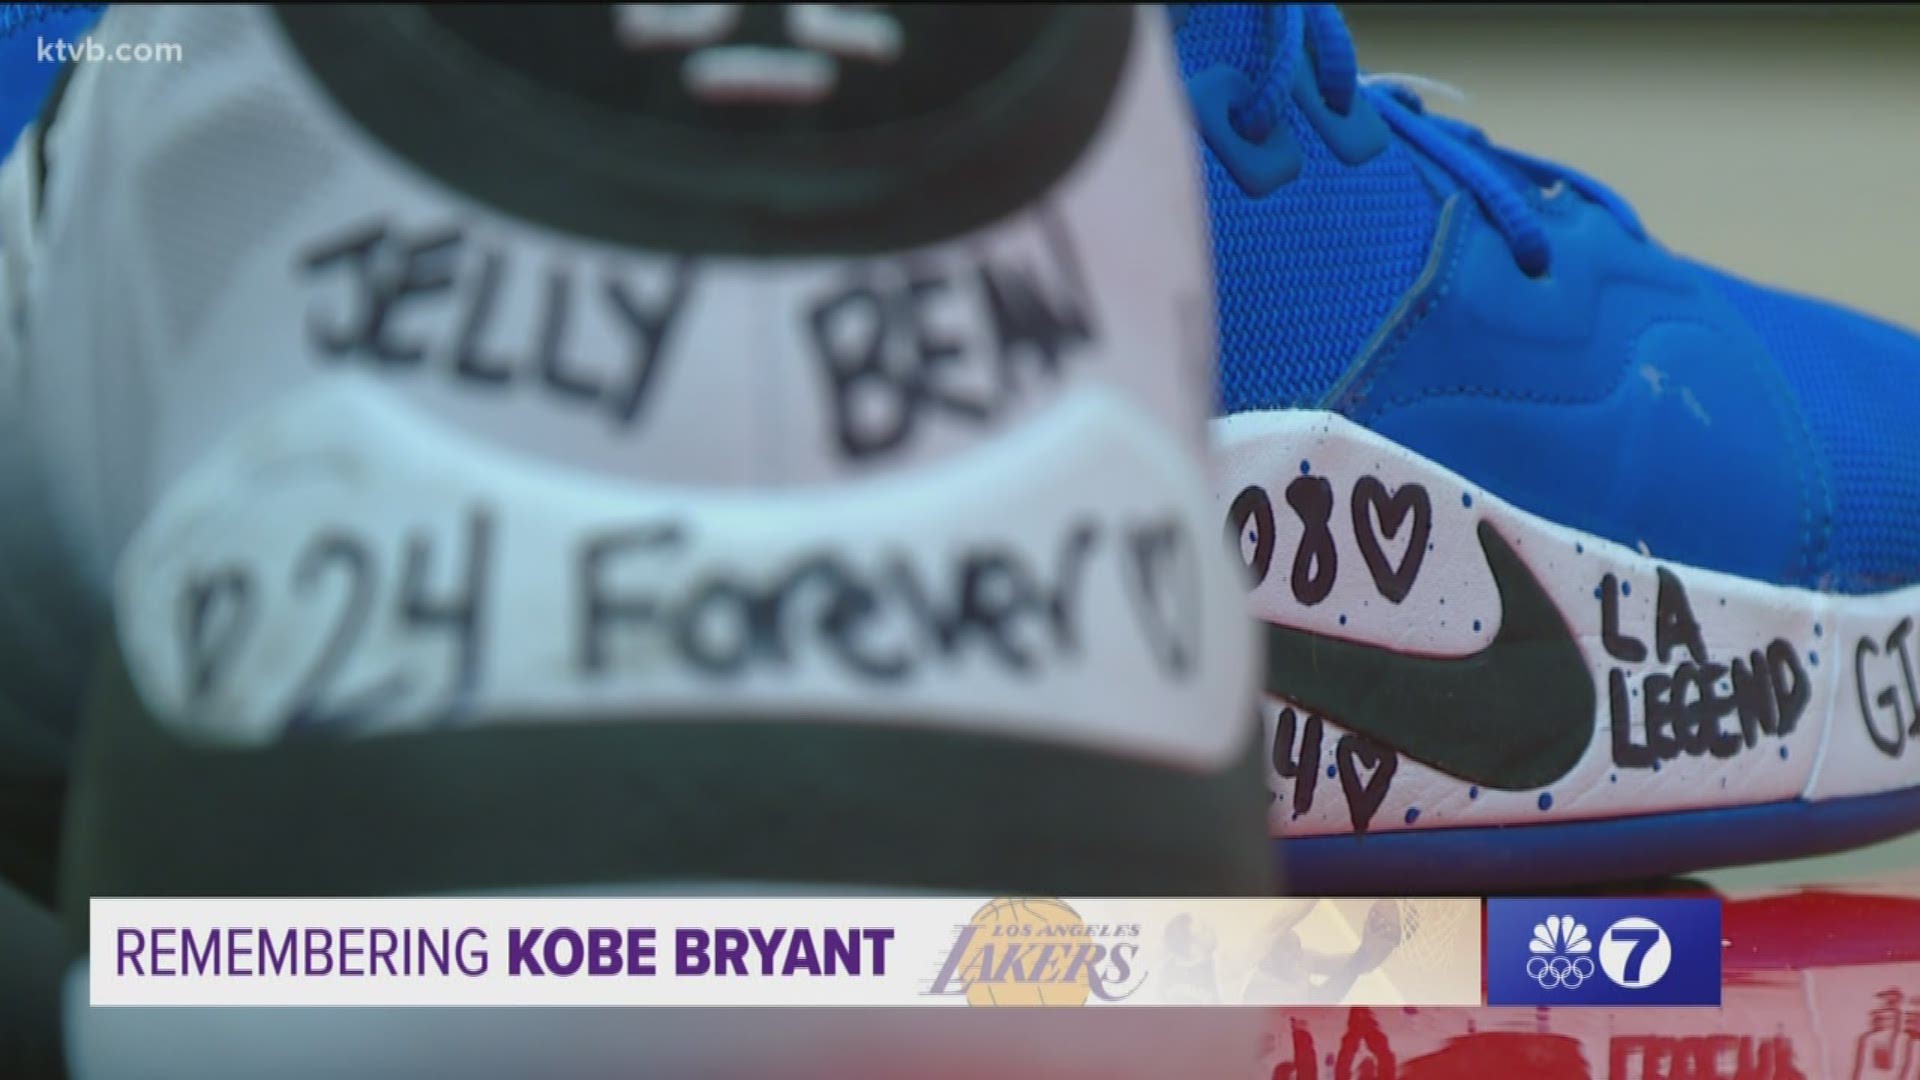 Last Sunday, Kobe Bryant, his 13-year-old daughter, and 7 others were killed in a tragic helicopter crash. Boise State MBB players remember Kobe and what he meant.